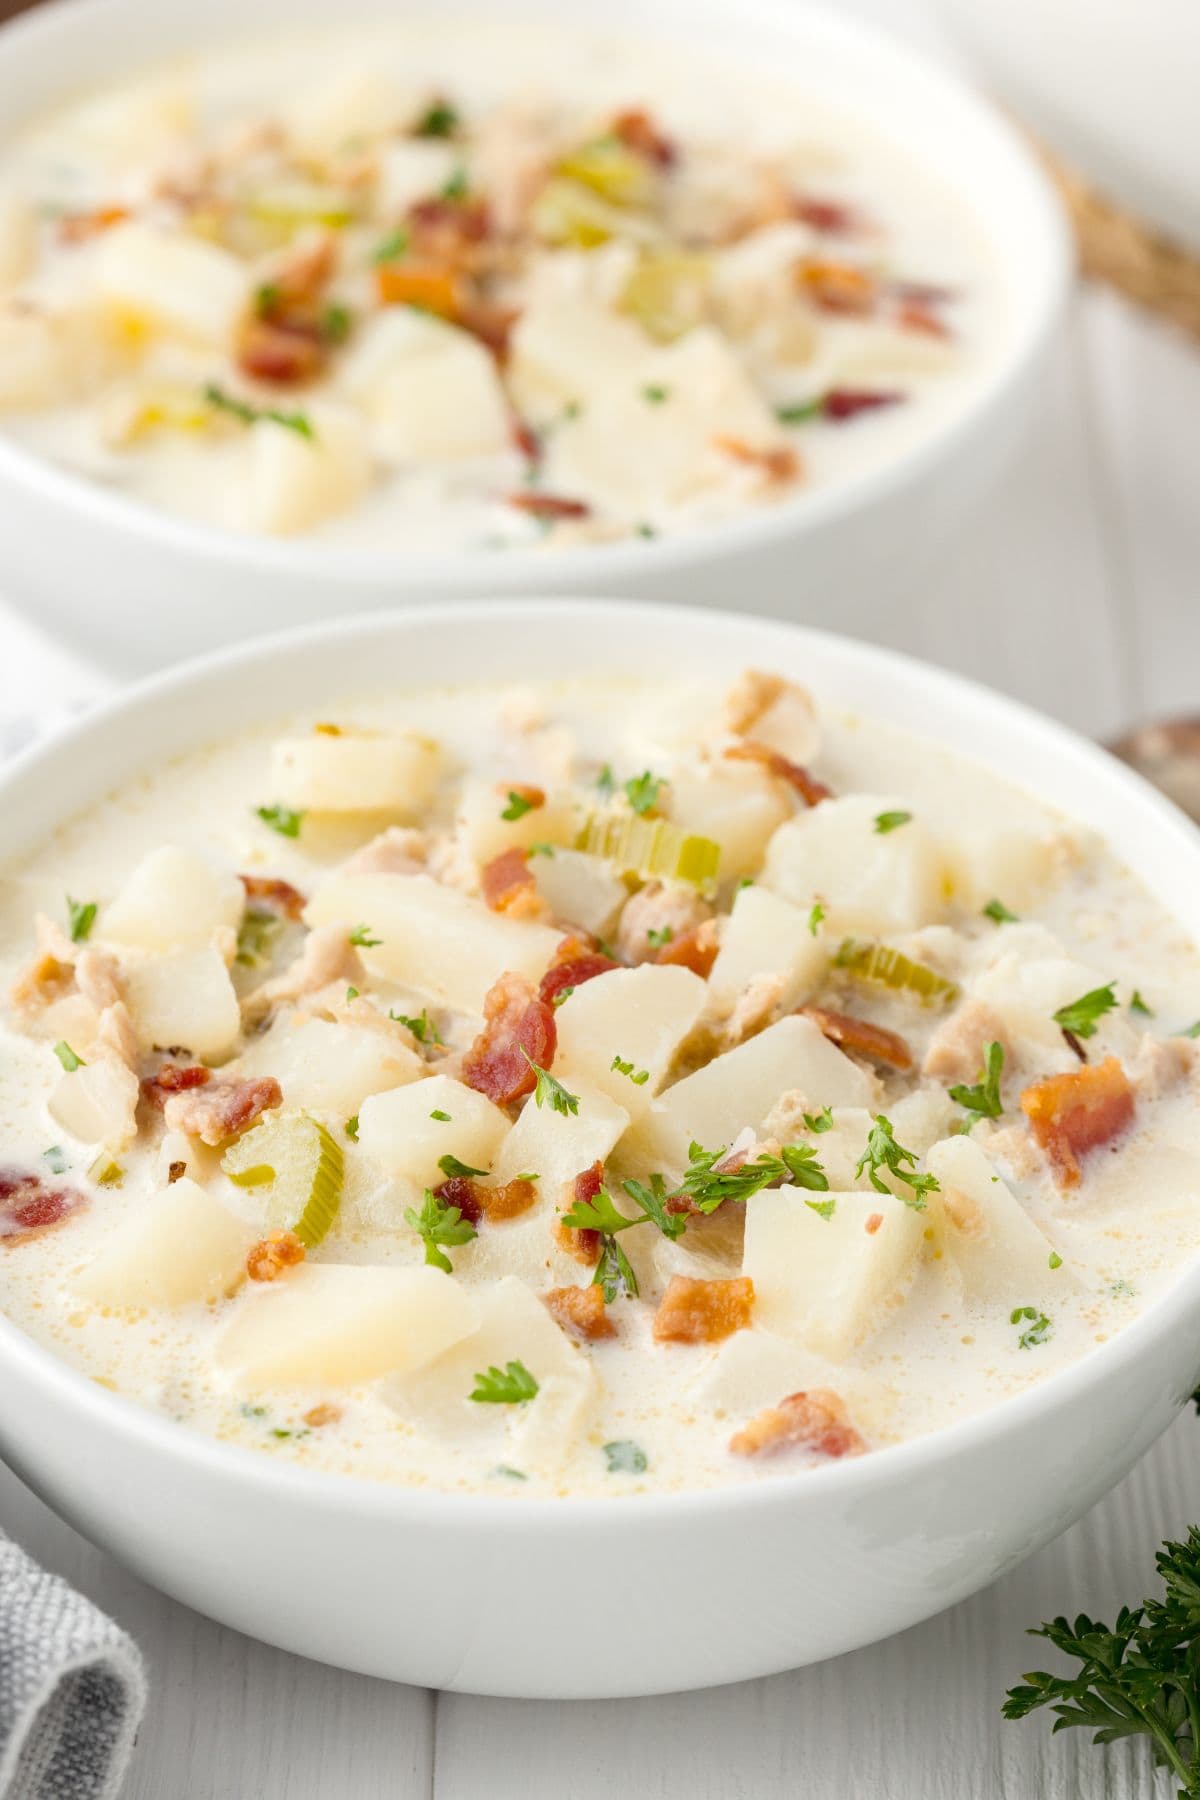 2 bowls of clam chowder are served on a table.